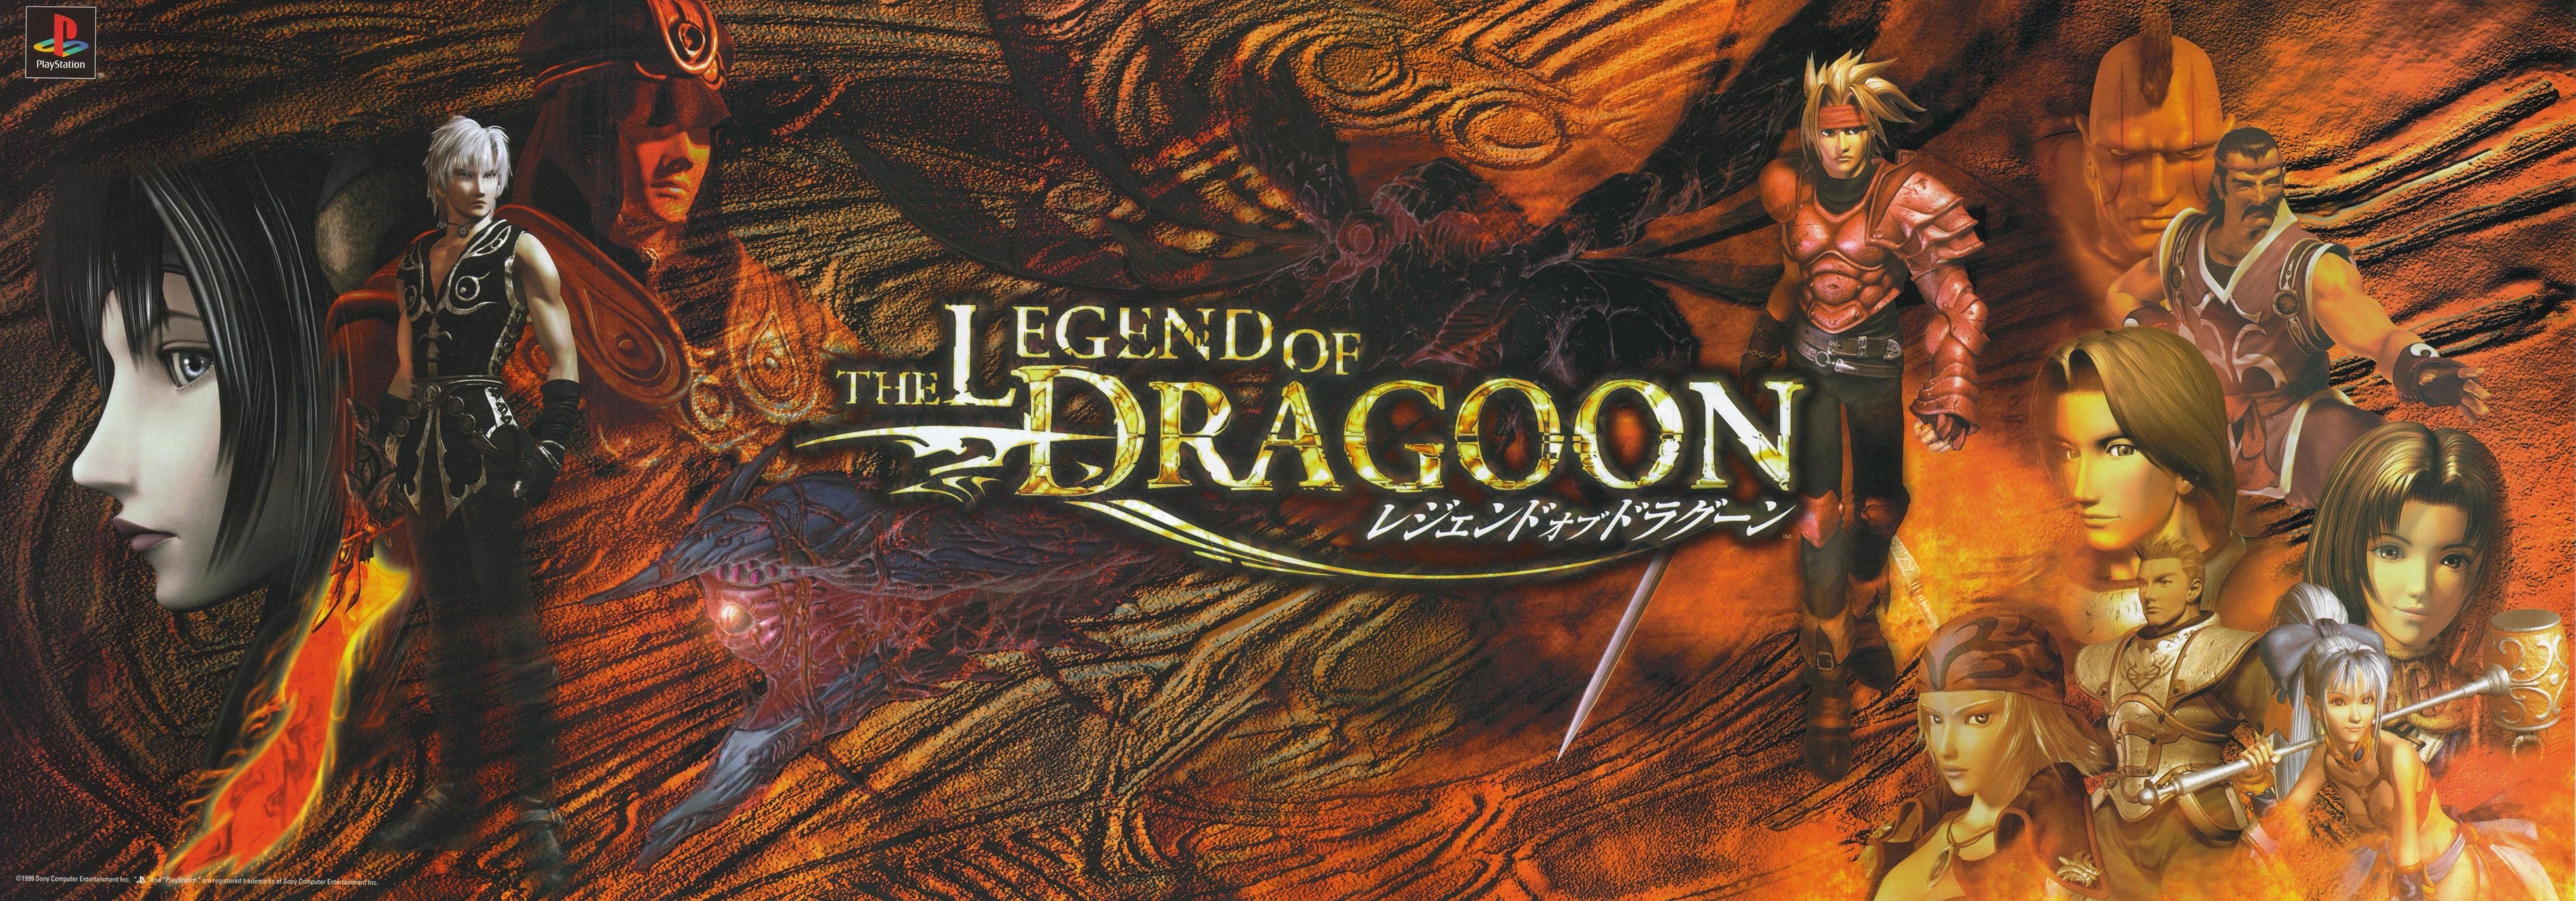 The Legend Of Dragoon PlayStation RPG JRPGs 4322x1512